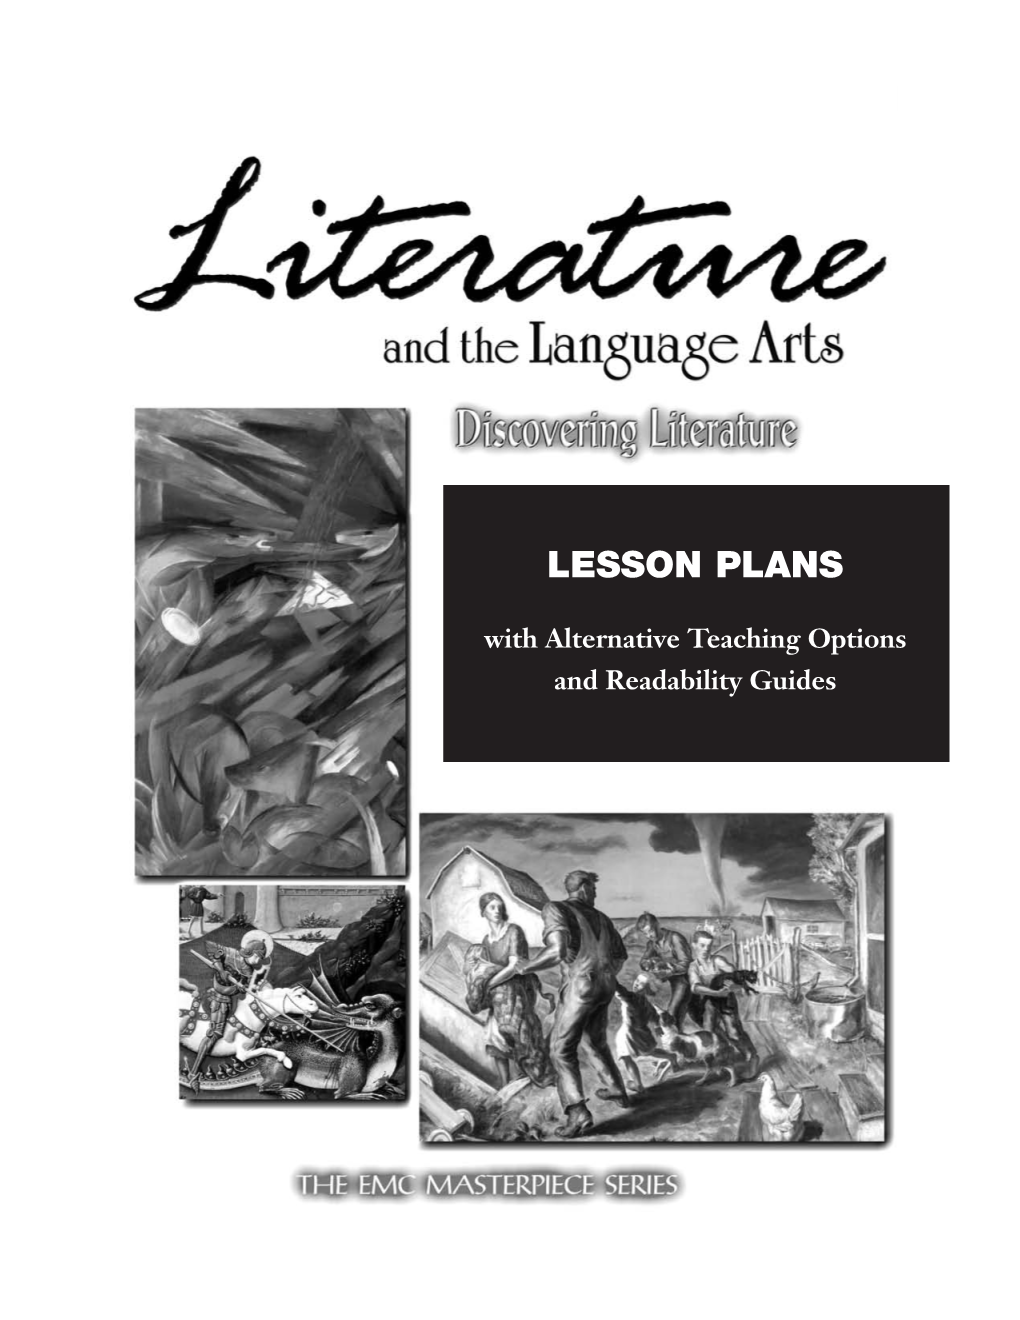 LESSON PLANS with Alternative Teaching Options and Readability Guides Staff Credits